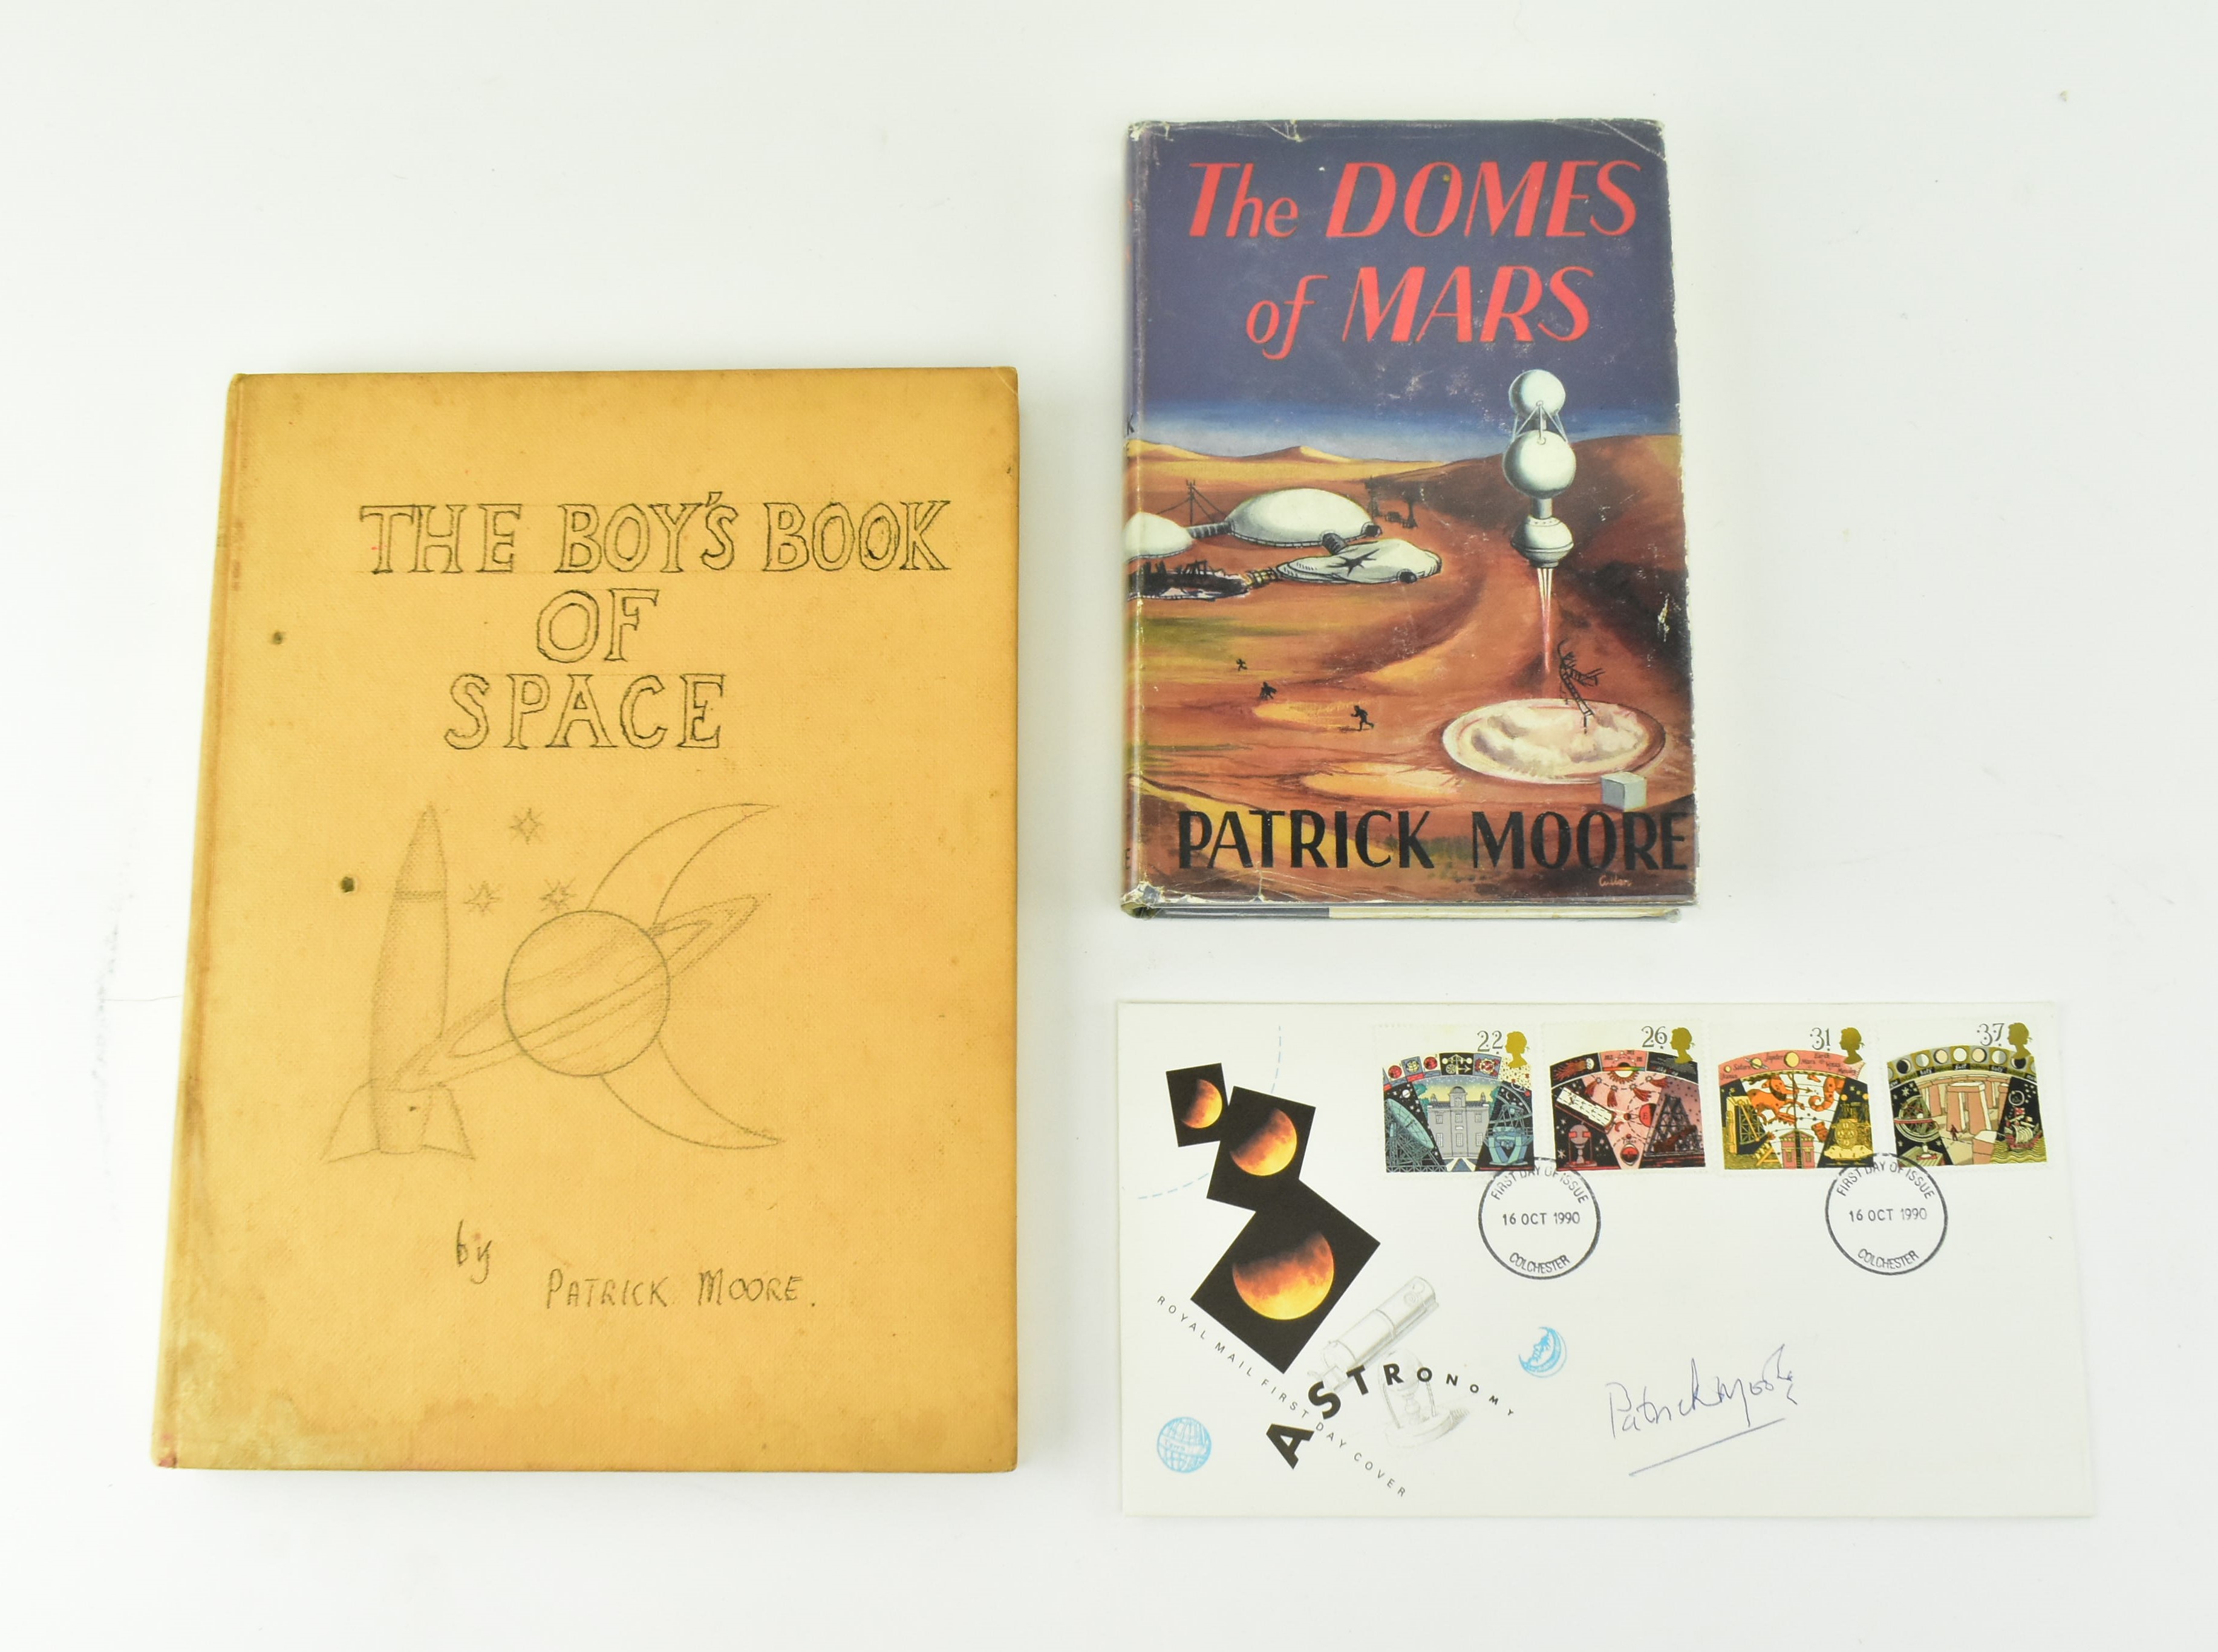 PATRICK MOORE - THE DOMES OF MARS 1ST EDITION & SIGNED FDC